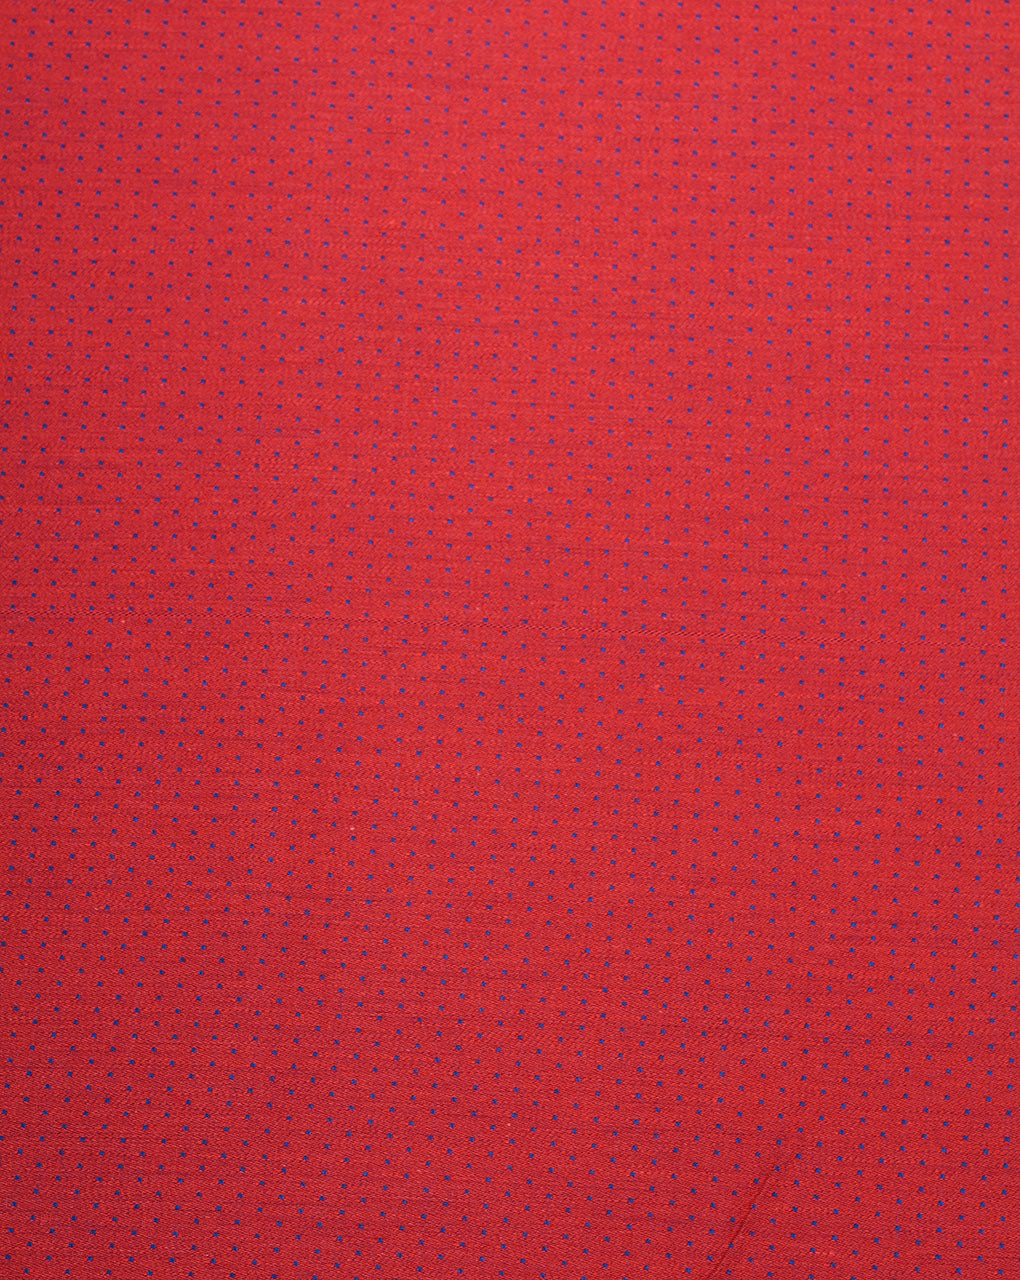 Red And Blue Polka Dot Design Cotton Print Fabric